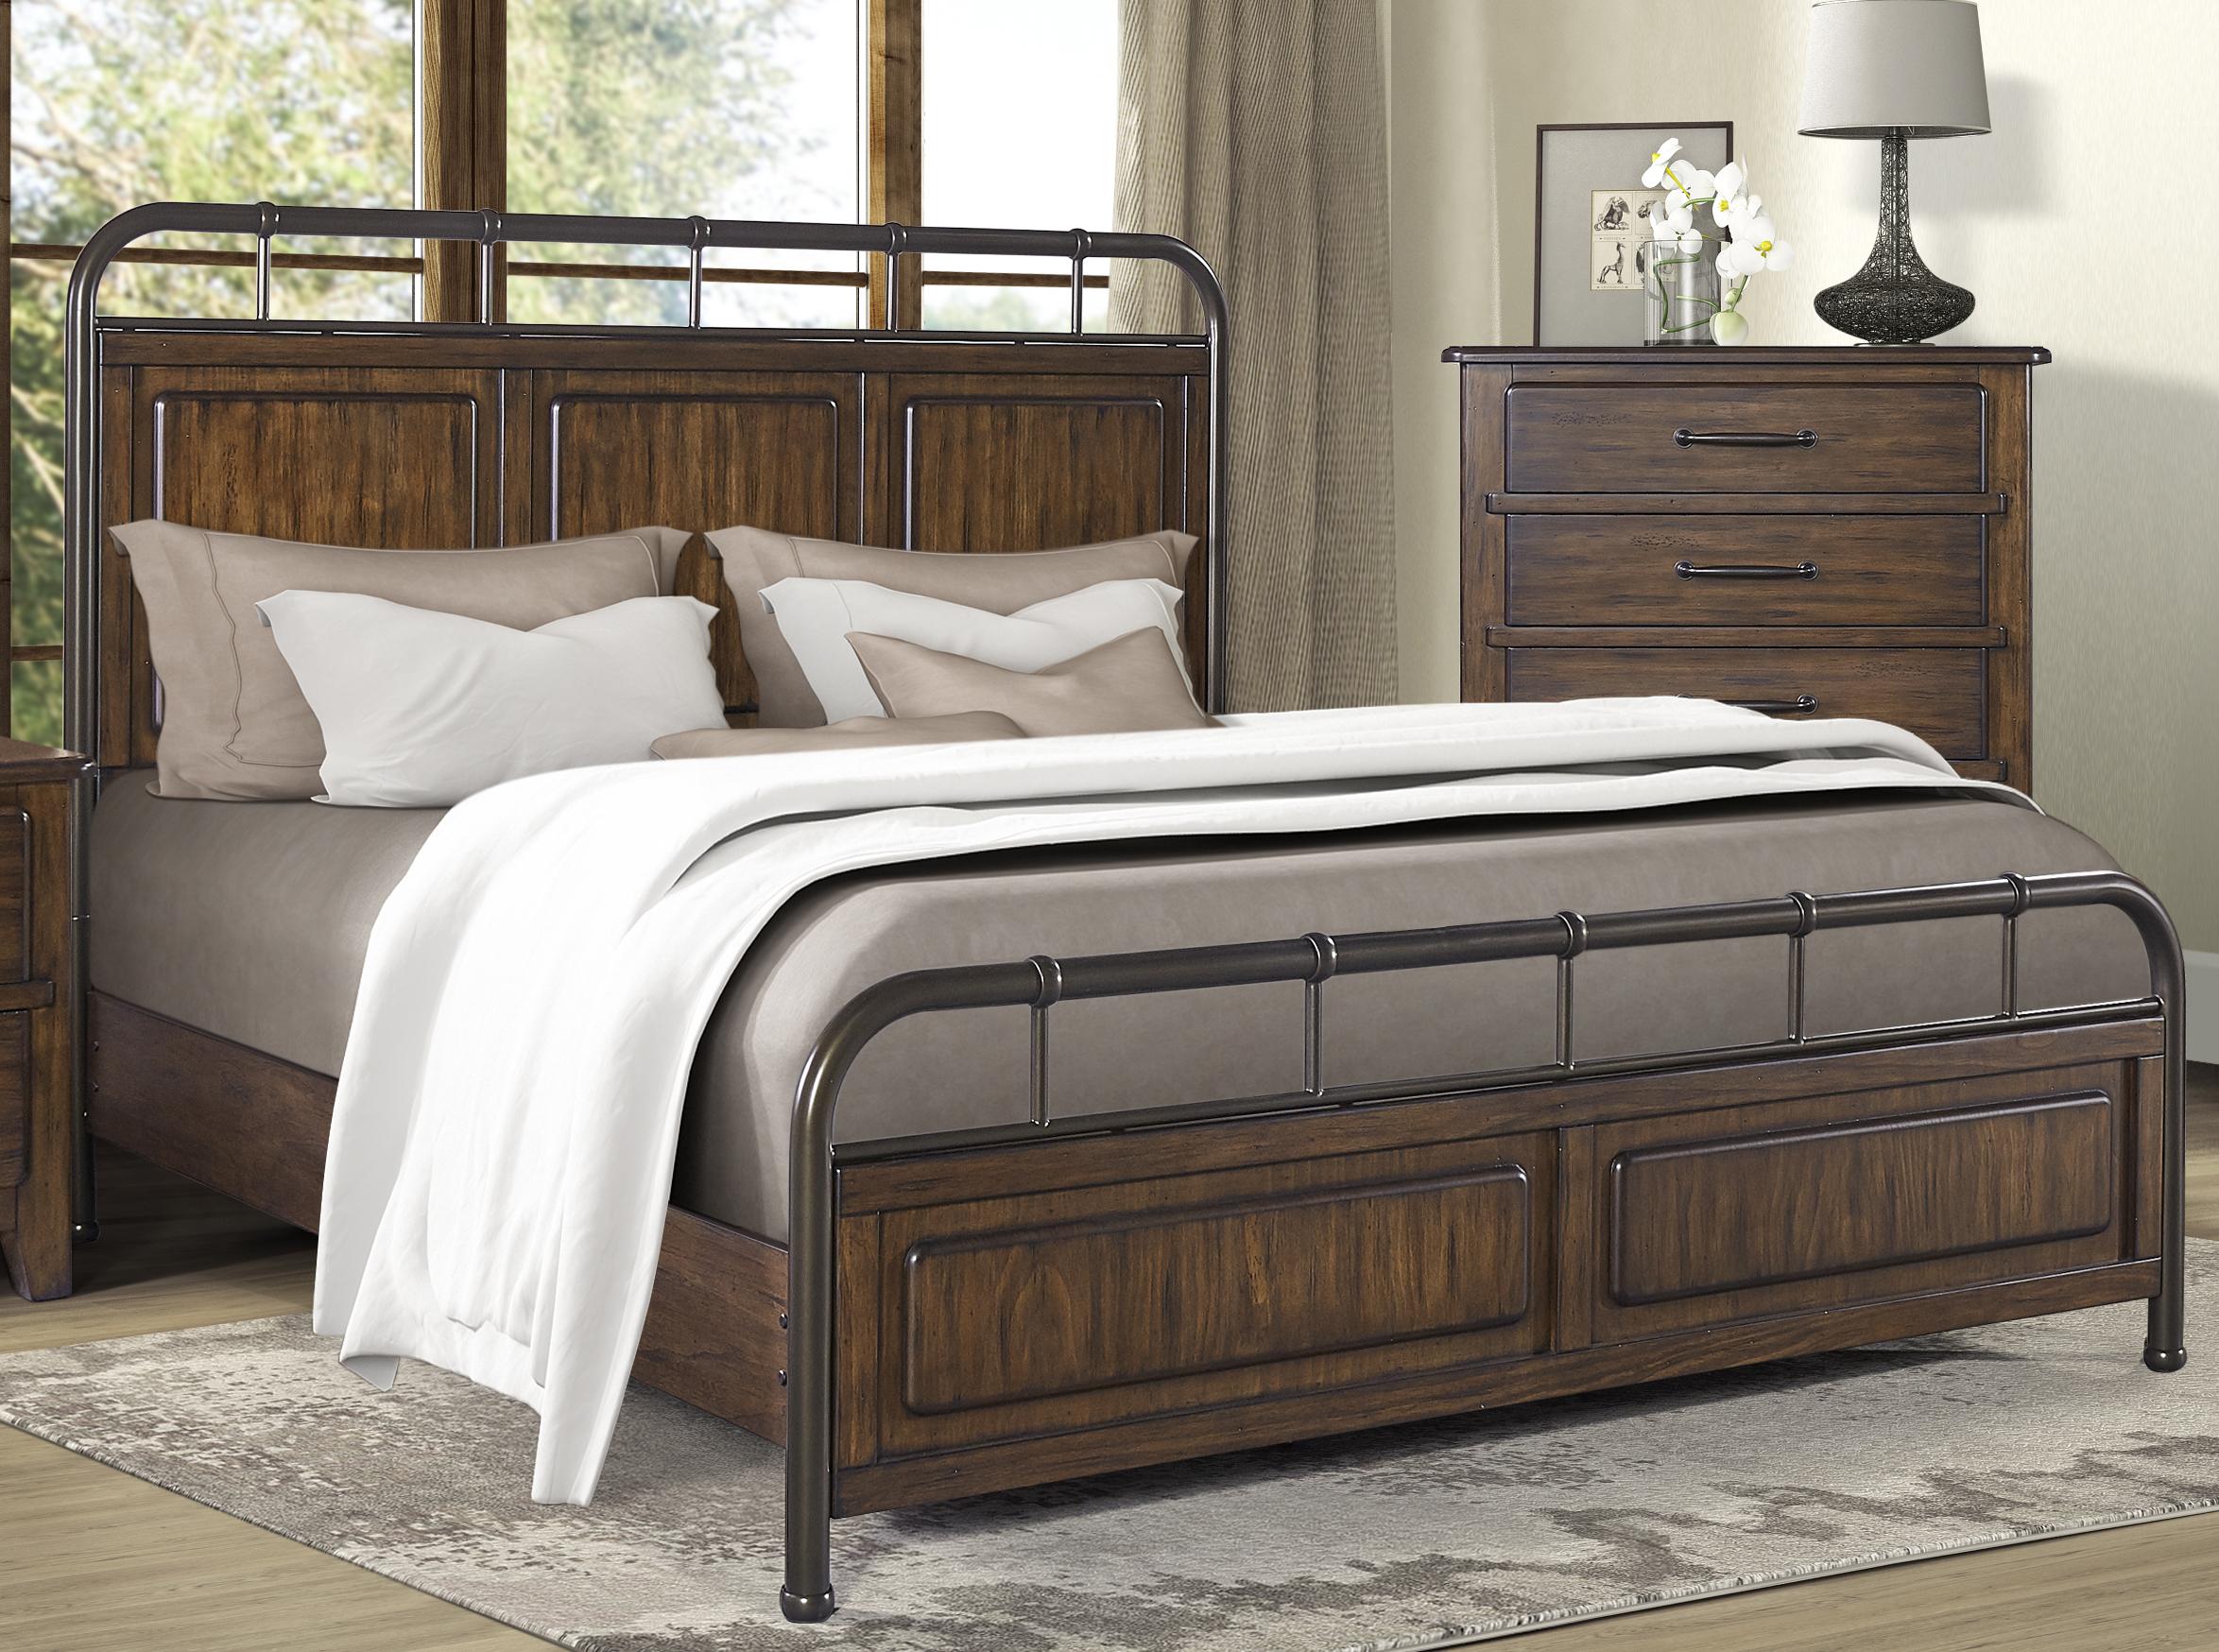 Contemporary, Modern Panel Bed DANVILLE 315-110 315-110 in Coffee, Brown 